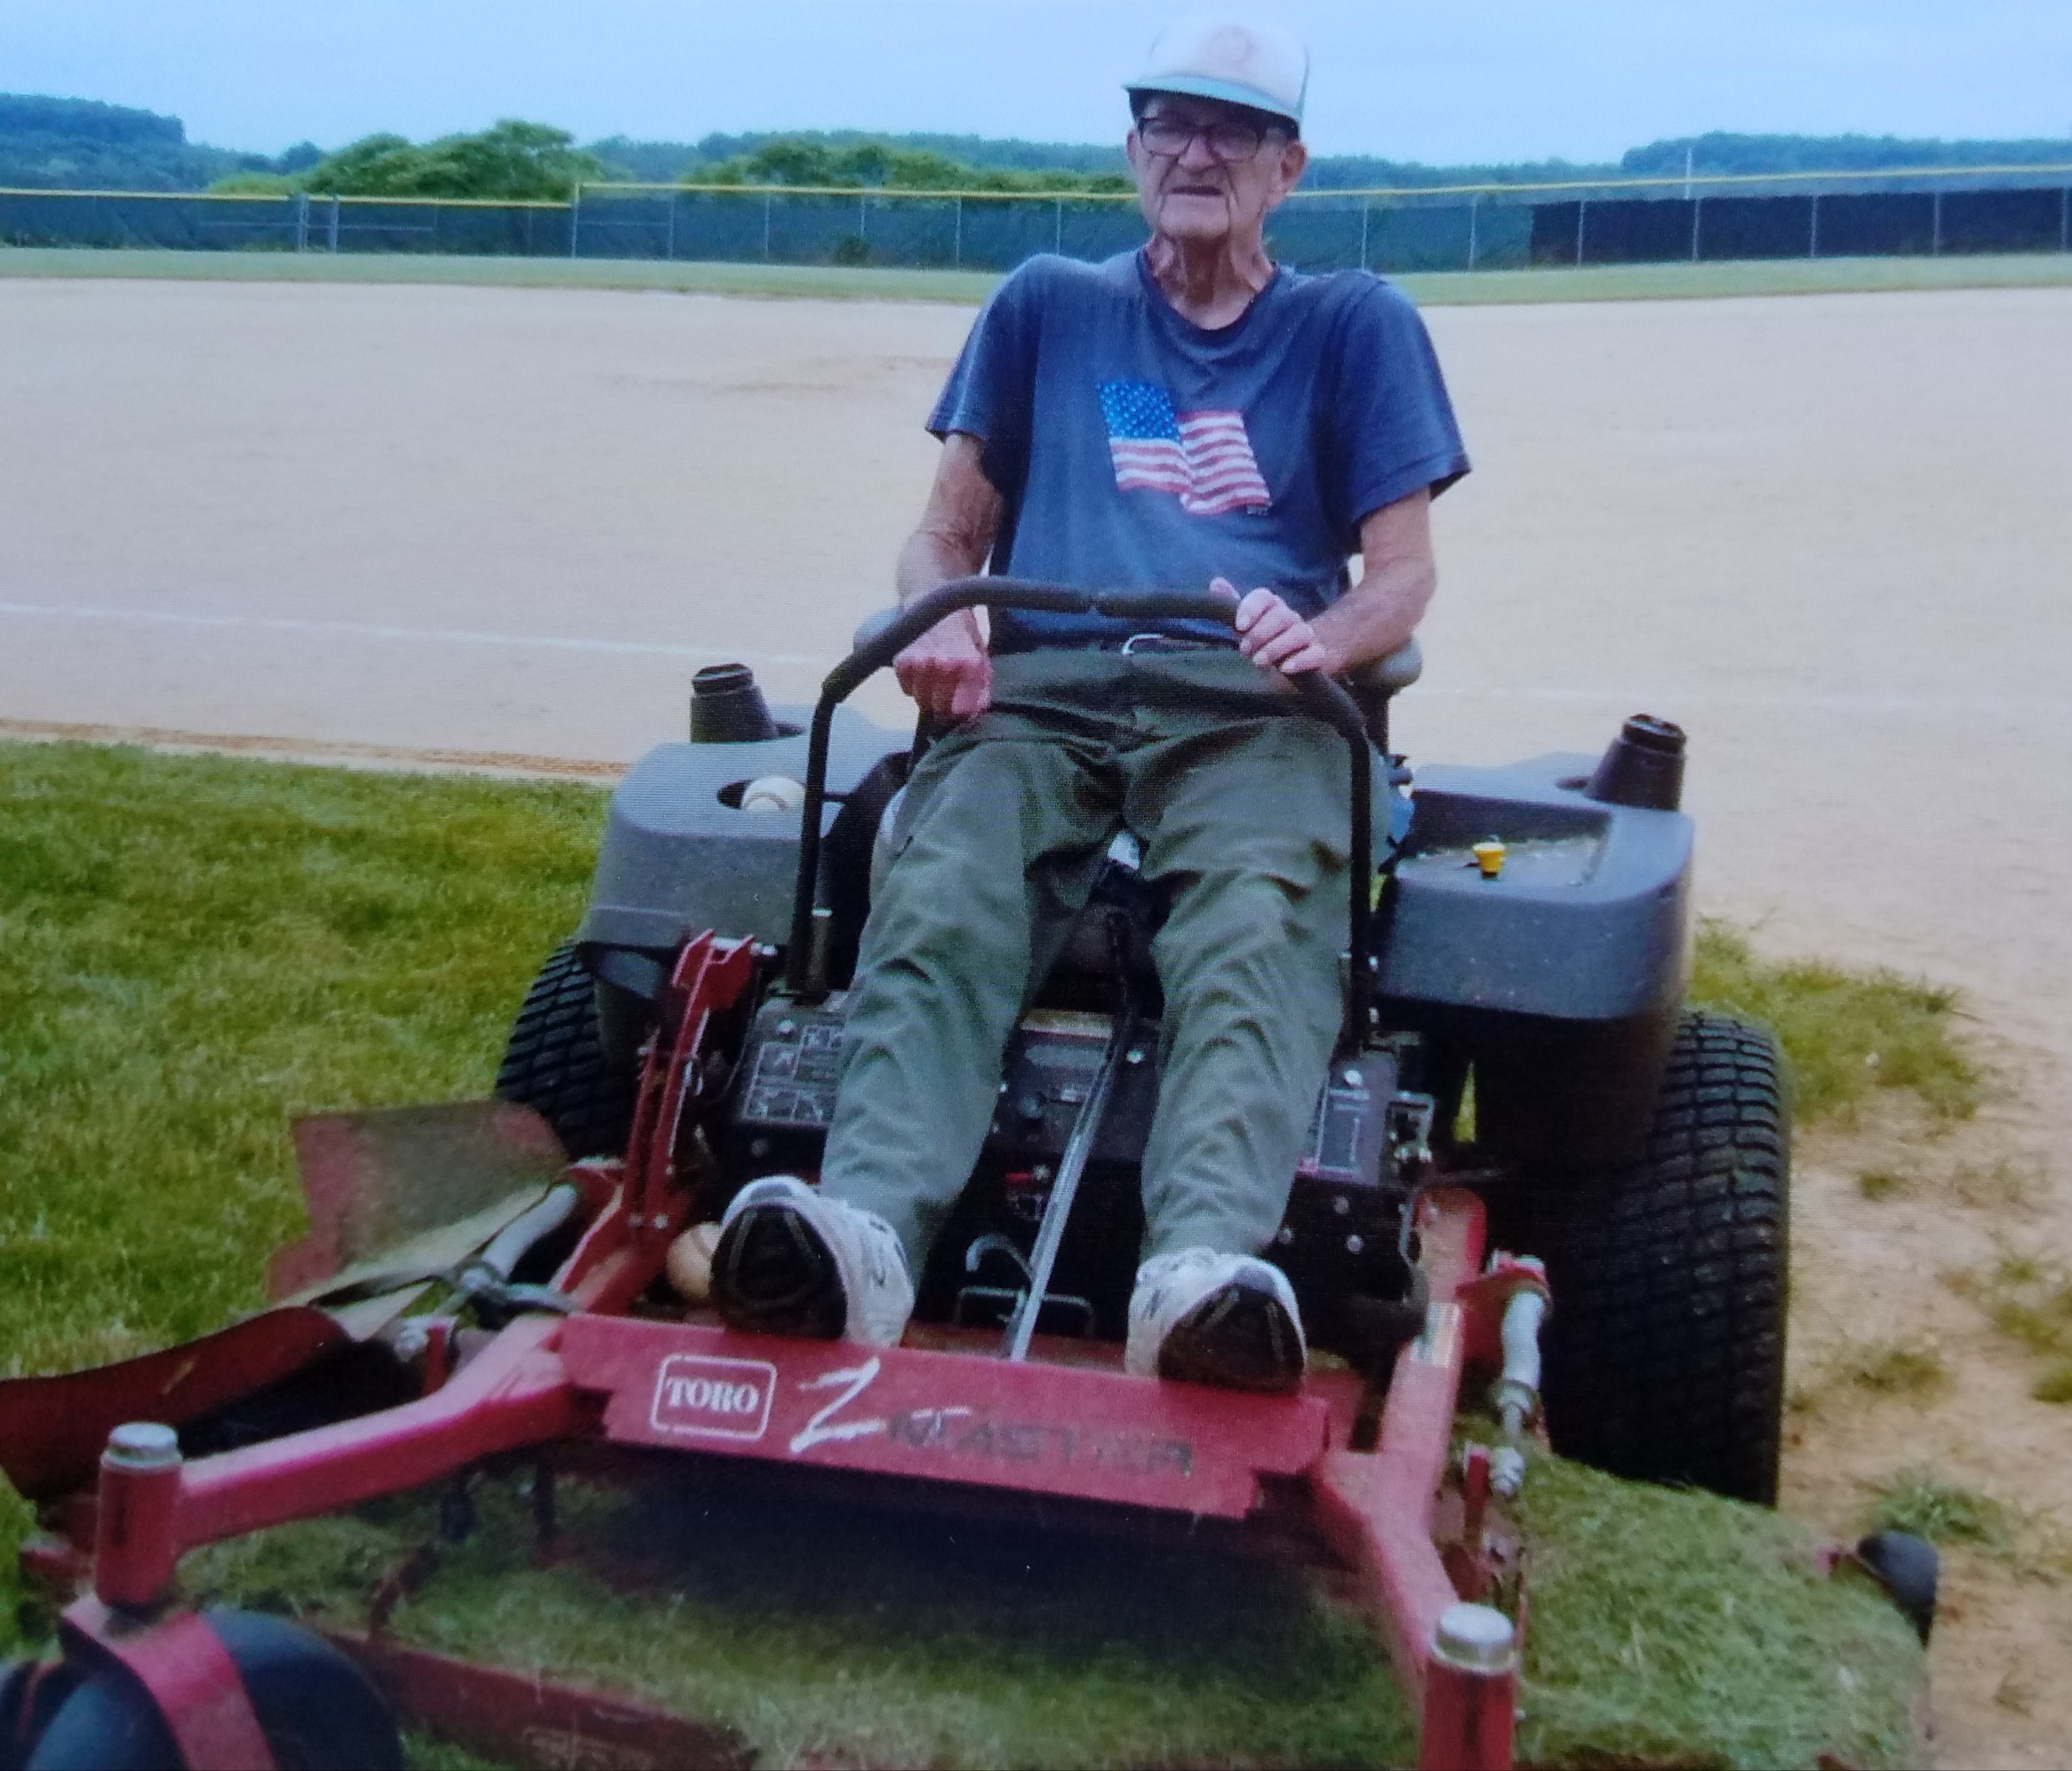 James A. Anderson sits astride his trusty Toro mower at the baseball field in the Lawrence Township Recreation Park. Anderson has volunteered to mow the fields and other grassy areas at the park for over 19 years. He said he started mowing after his retirement to help out a friend, but ended up taking over soon after. He said it takes him about seven hours, split between two days to mow the nearly 25 acres of grass at the park. (Photo by Kimberly Finnigan)